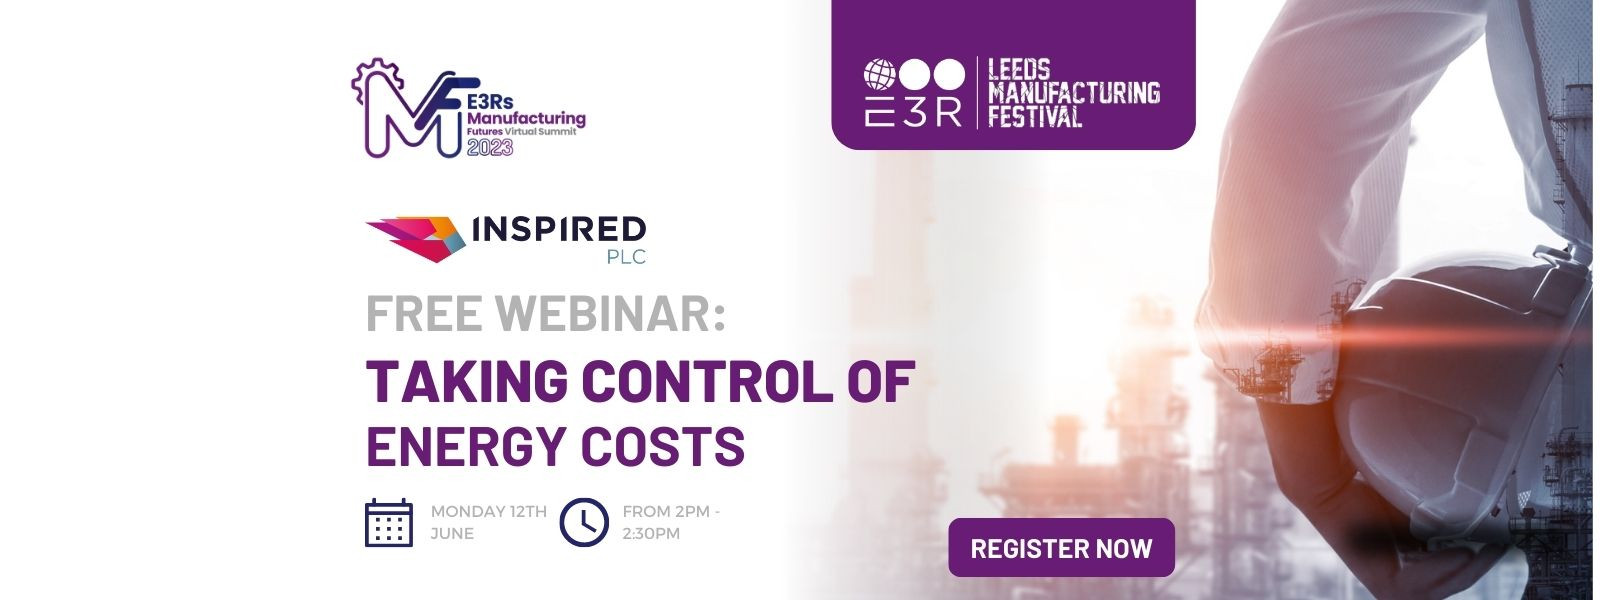 Free Webinar: Taking Control of Energy Costs